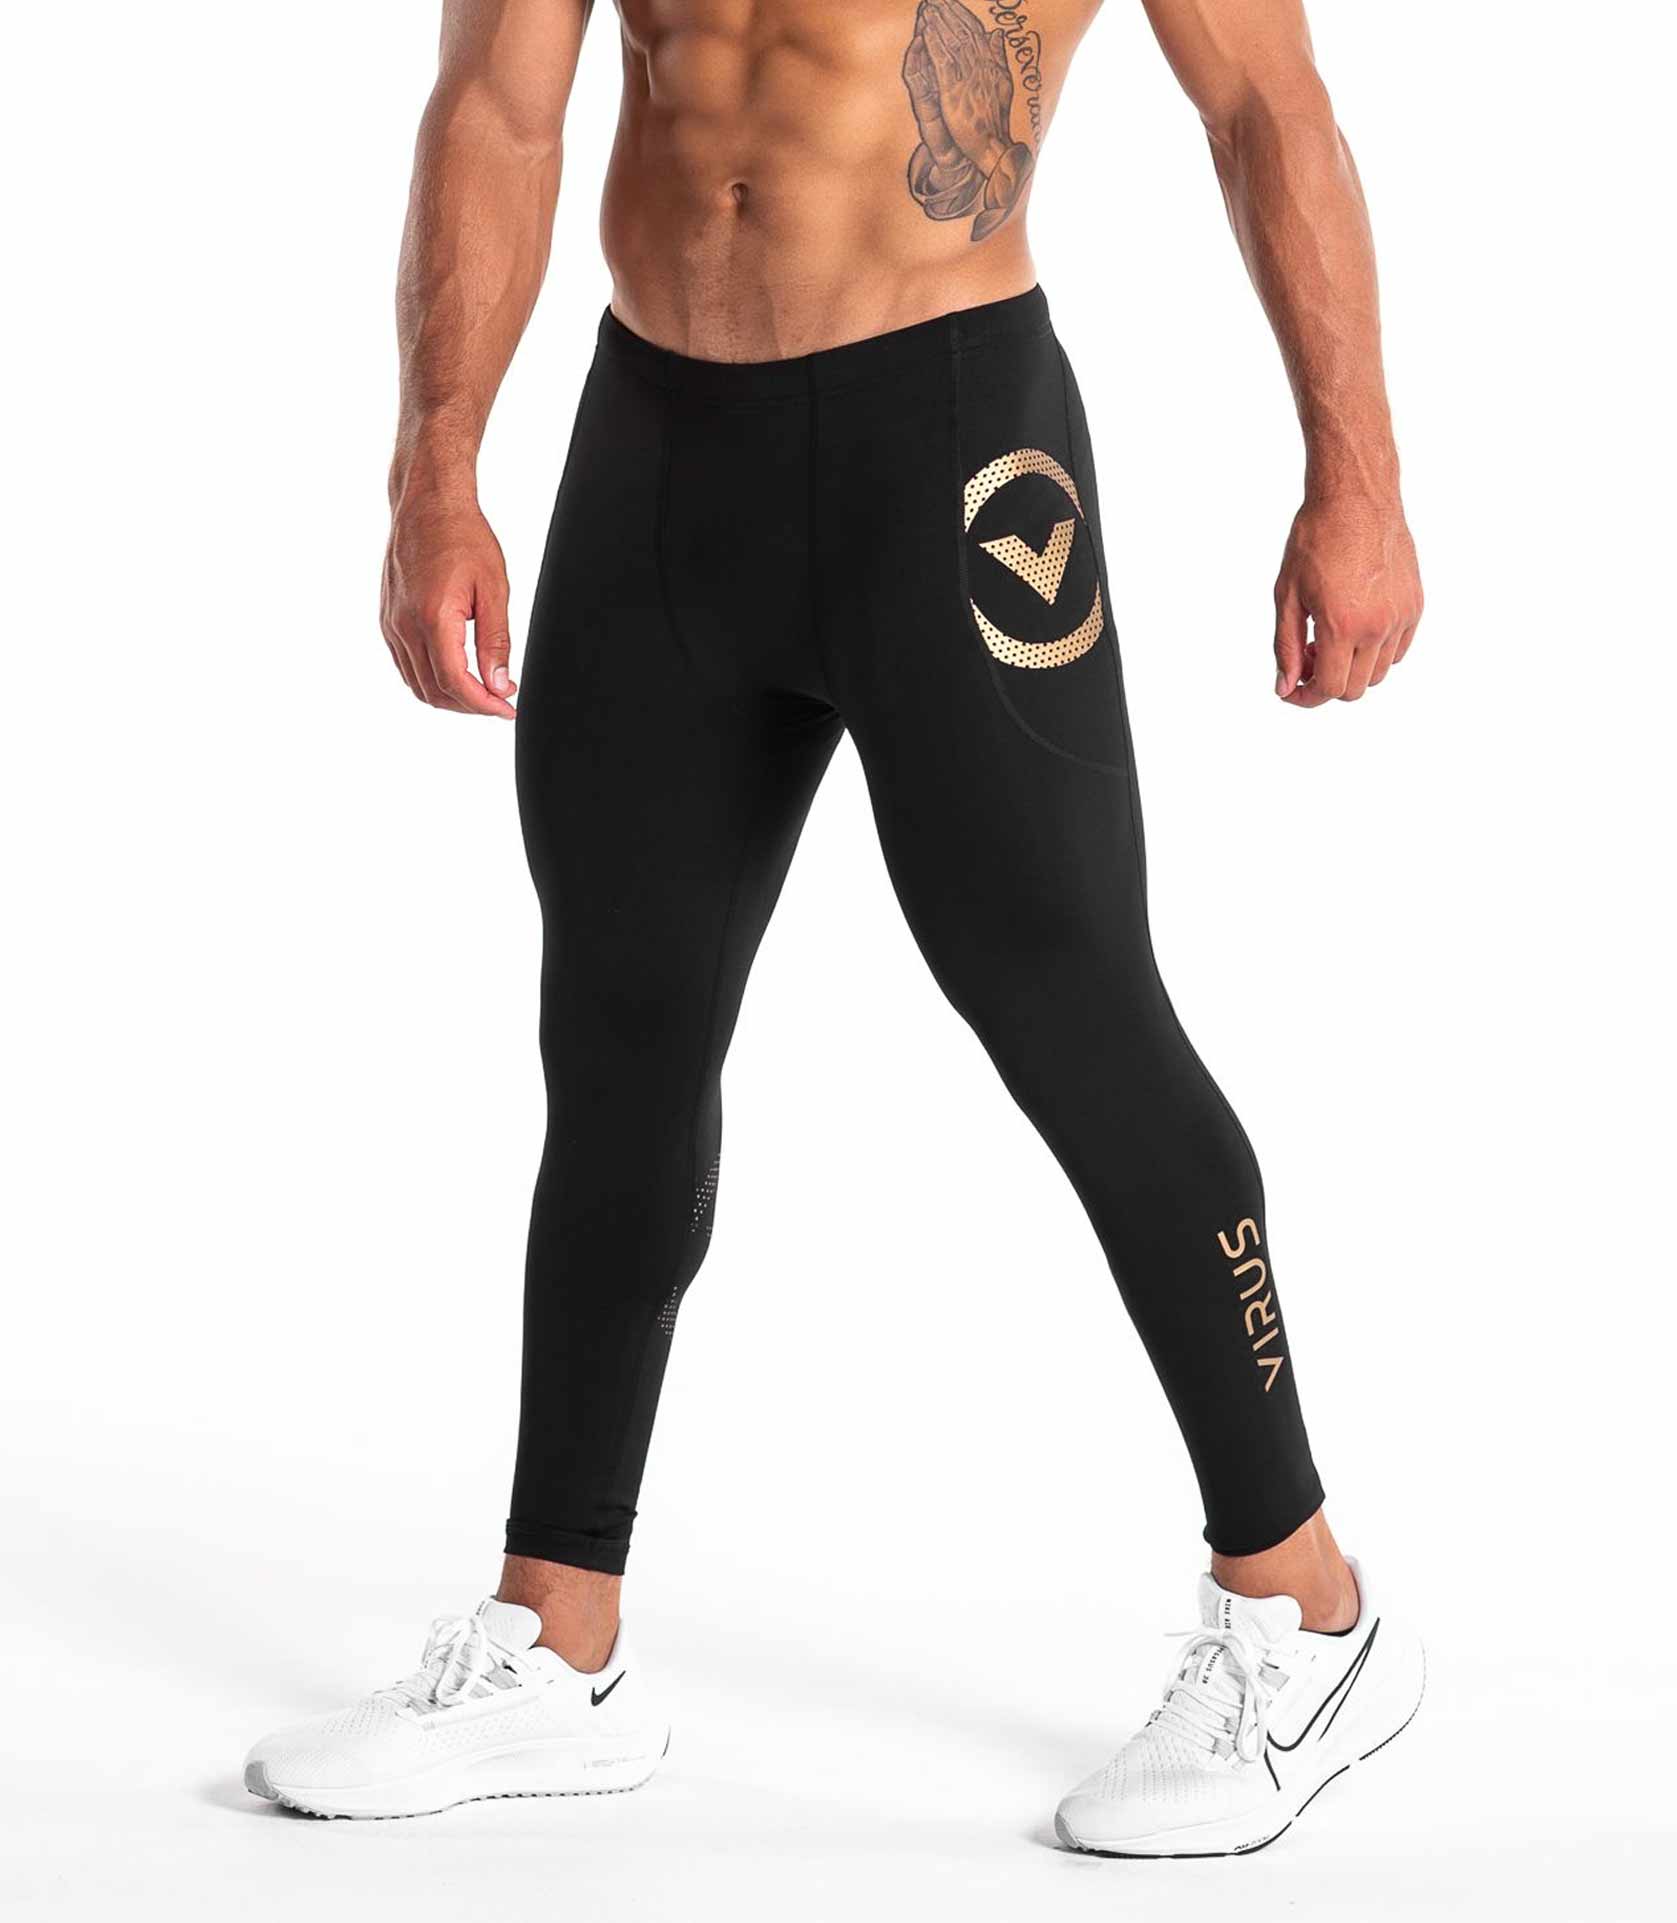 Virus | SIO16 Stay Warm Compression Pants